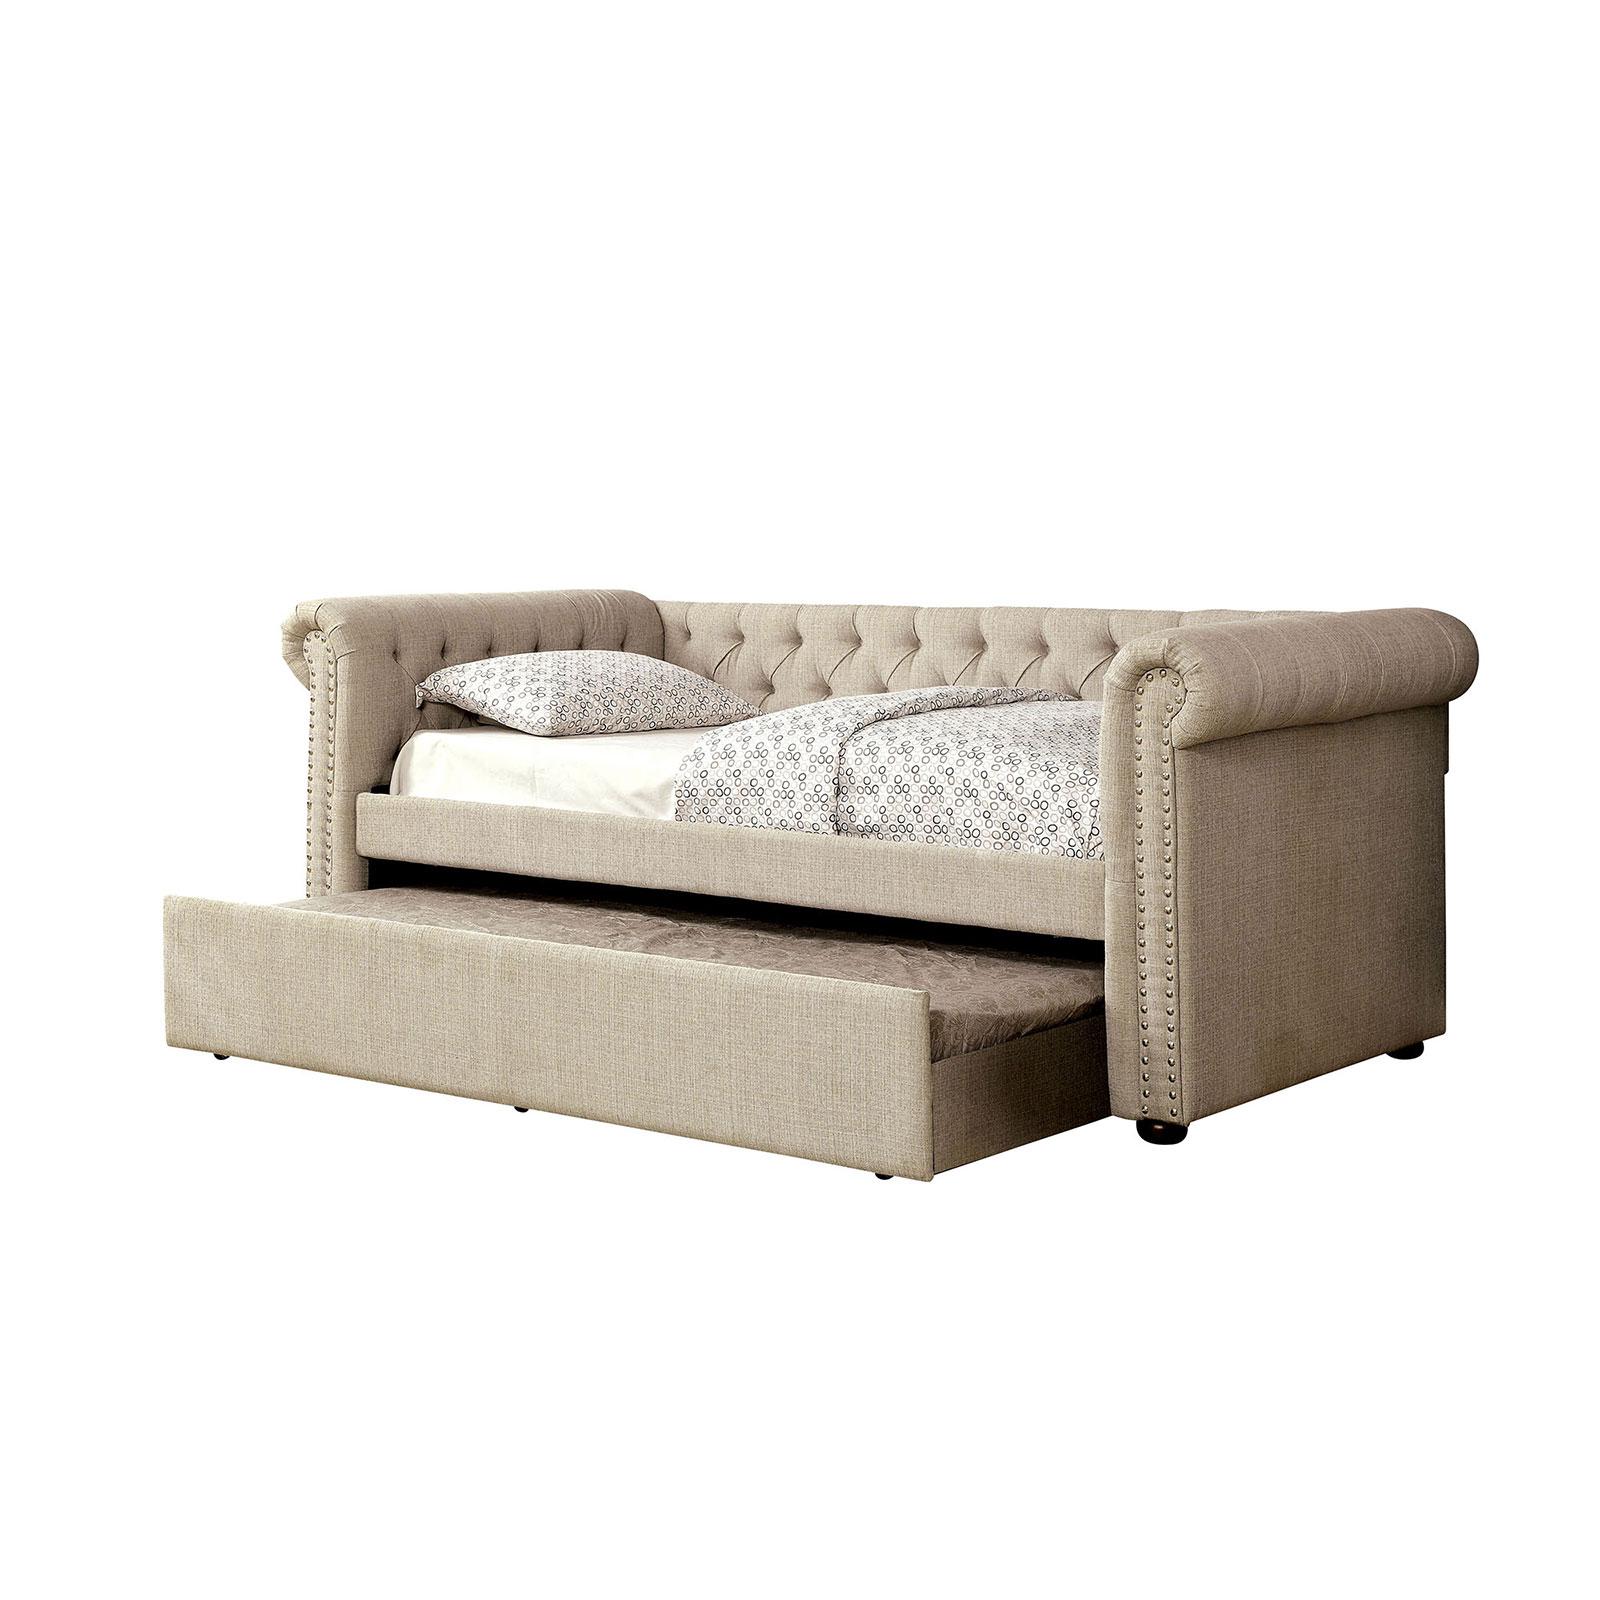 Contemporary Daybed LEANNA CM1027BG-Q-BED CM1027BG-Q-BED in Beige Fabric